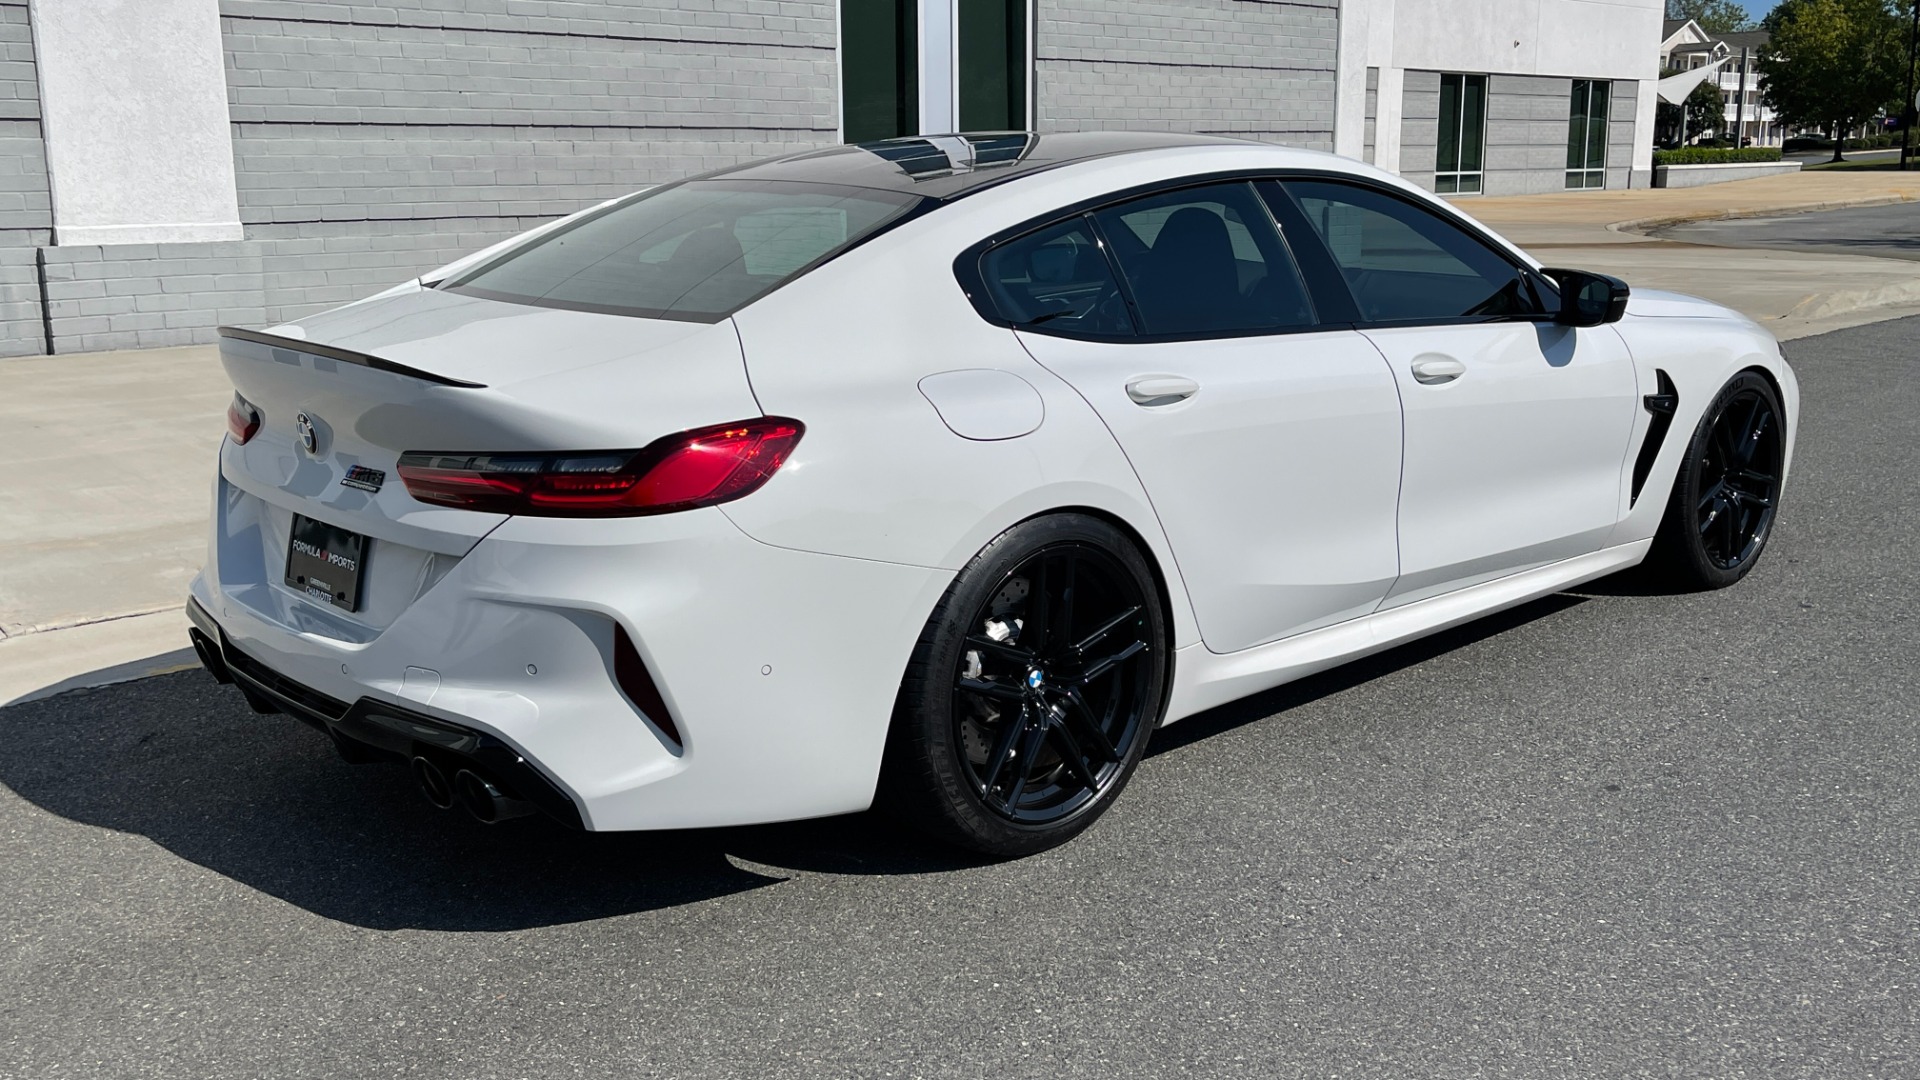 Used 2020 BMW M8 COMPETITON / TWIN TURBO / KW V3 SUSPENSION / FRONT LIFT / PPF / CERAMIC COA for sale Sold at Formula Imports in Charlotte NC 28227 6